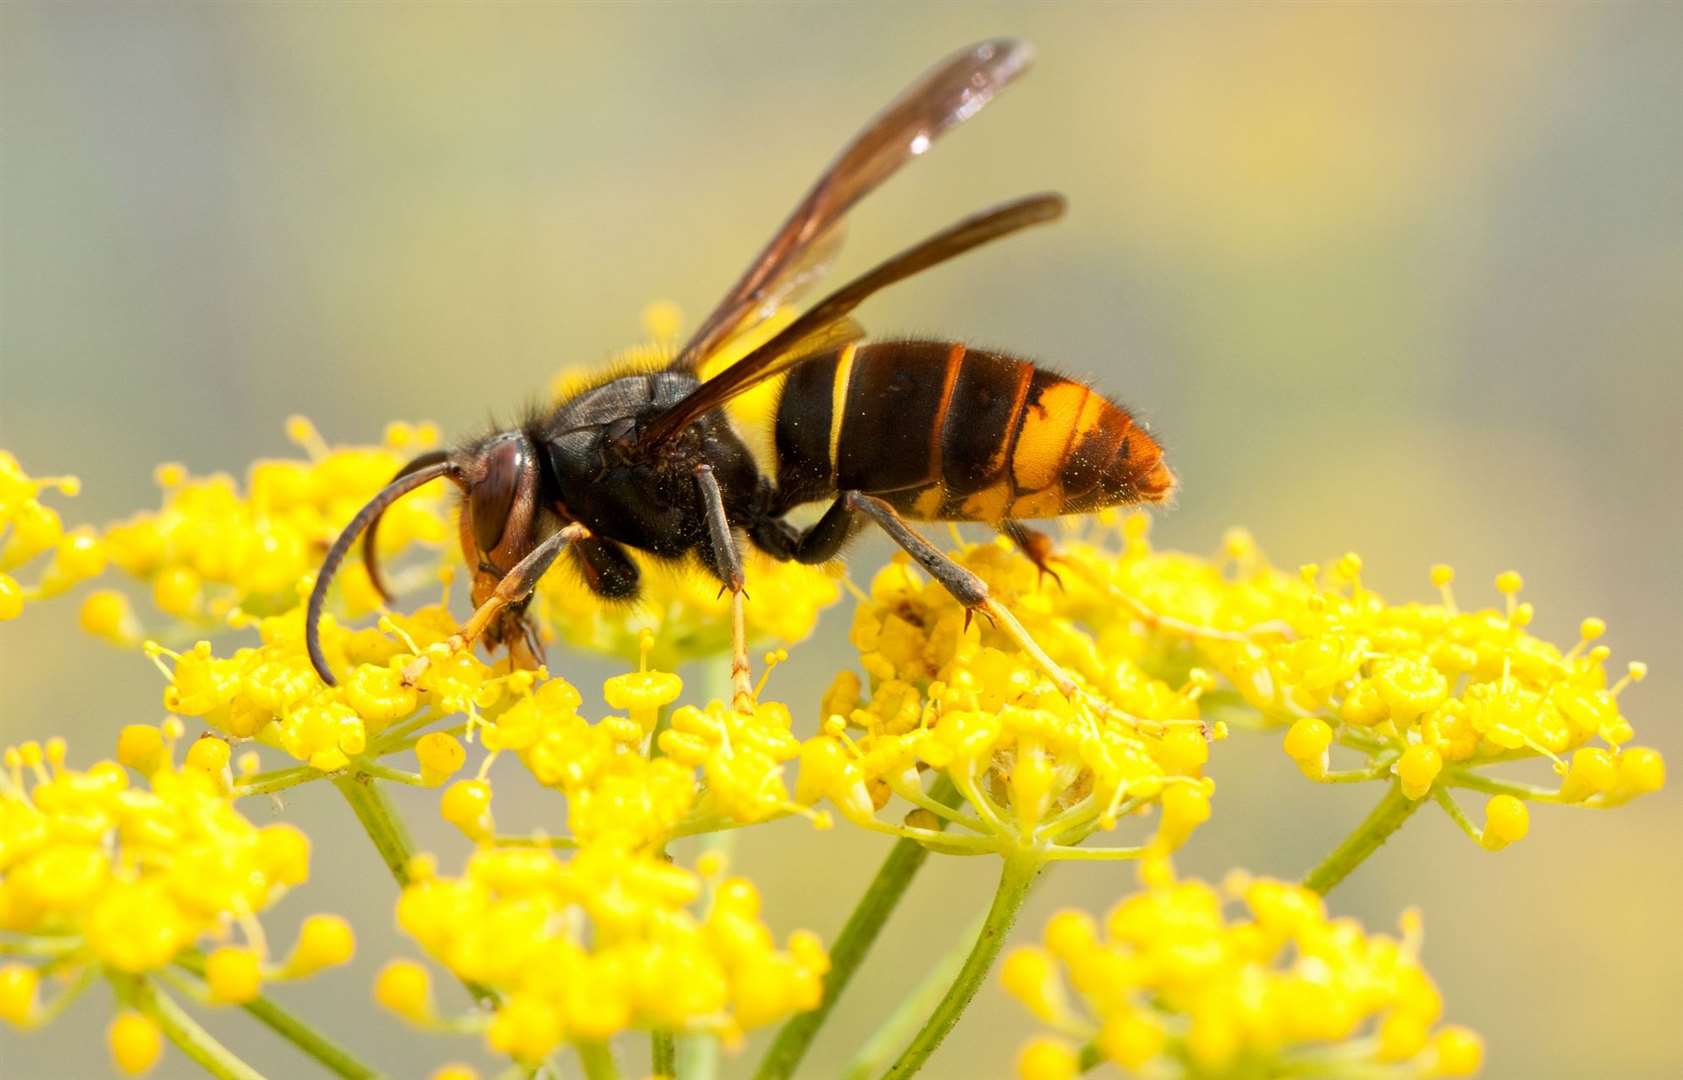 The creatures pose a risk to other insects and honey bees in particular. Image: iStock.